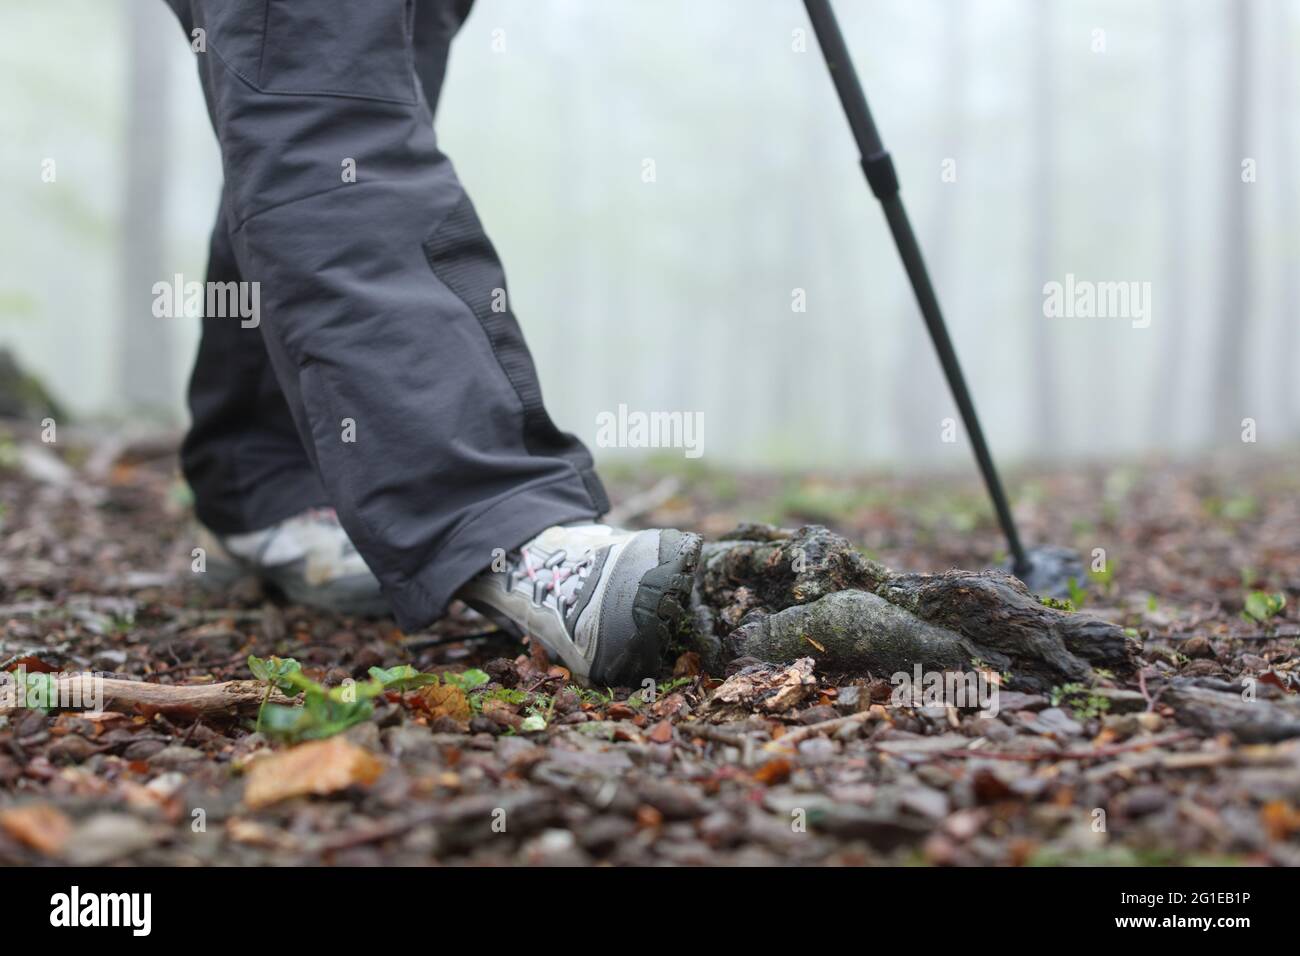 Close up of a trekker legs spraining ankle walking in a forest Stock Photo